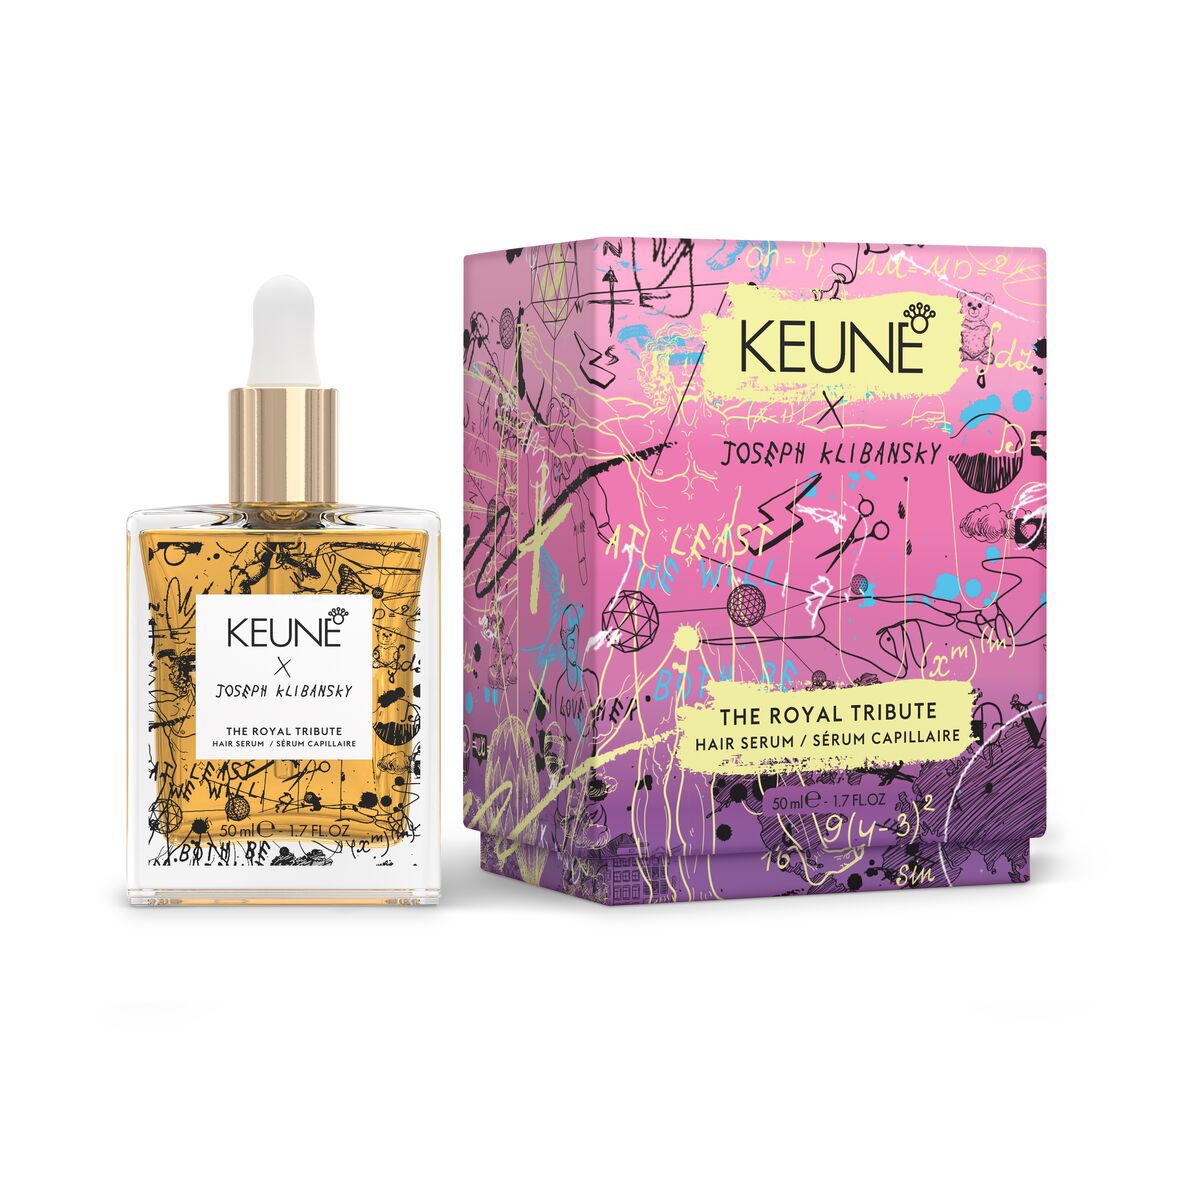 Discover Royal Tribute Hair Serum – a luxurious hair care product that gives your hair brilliant shine and effectively fights frizz. Now available at keune.ch.